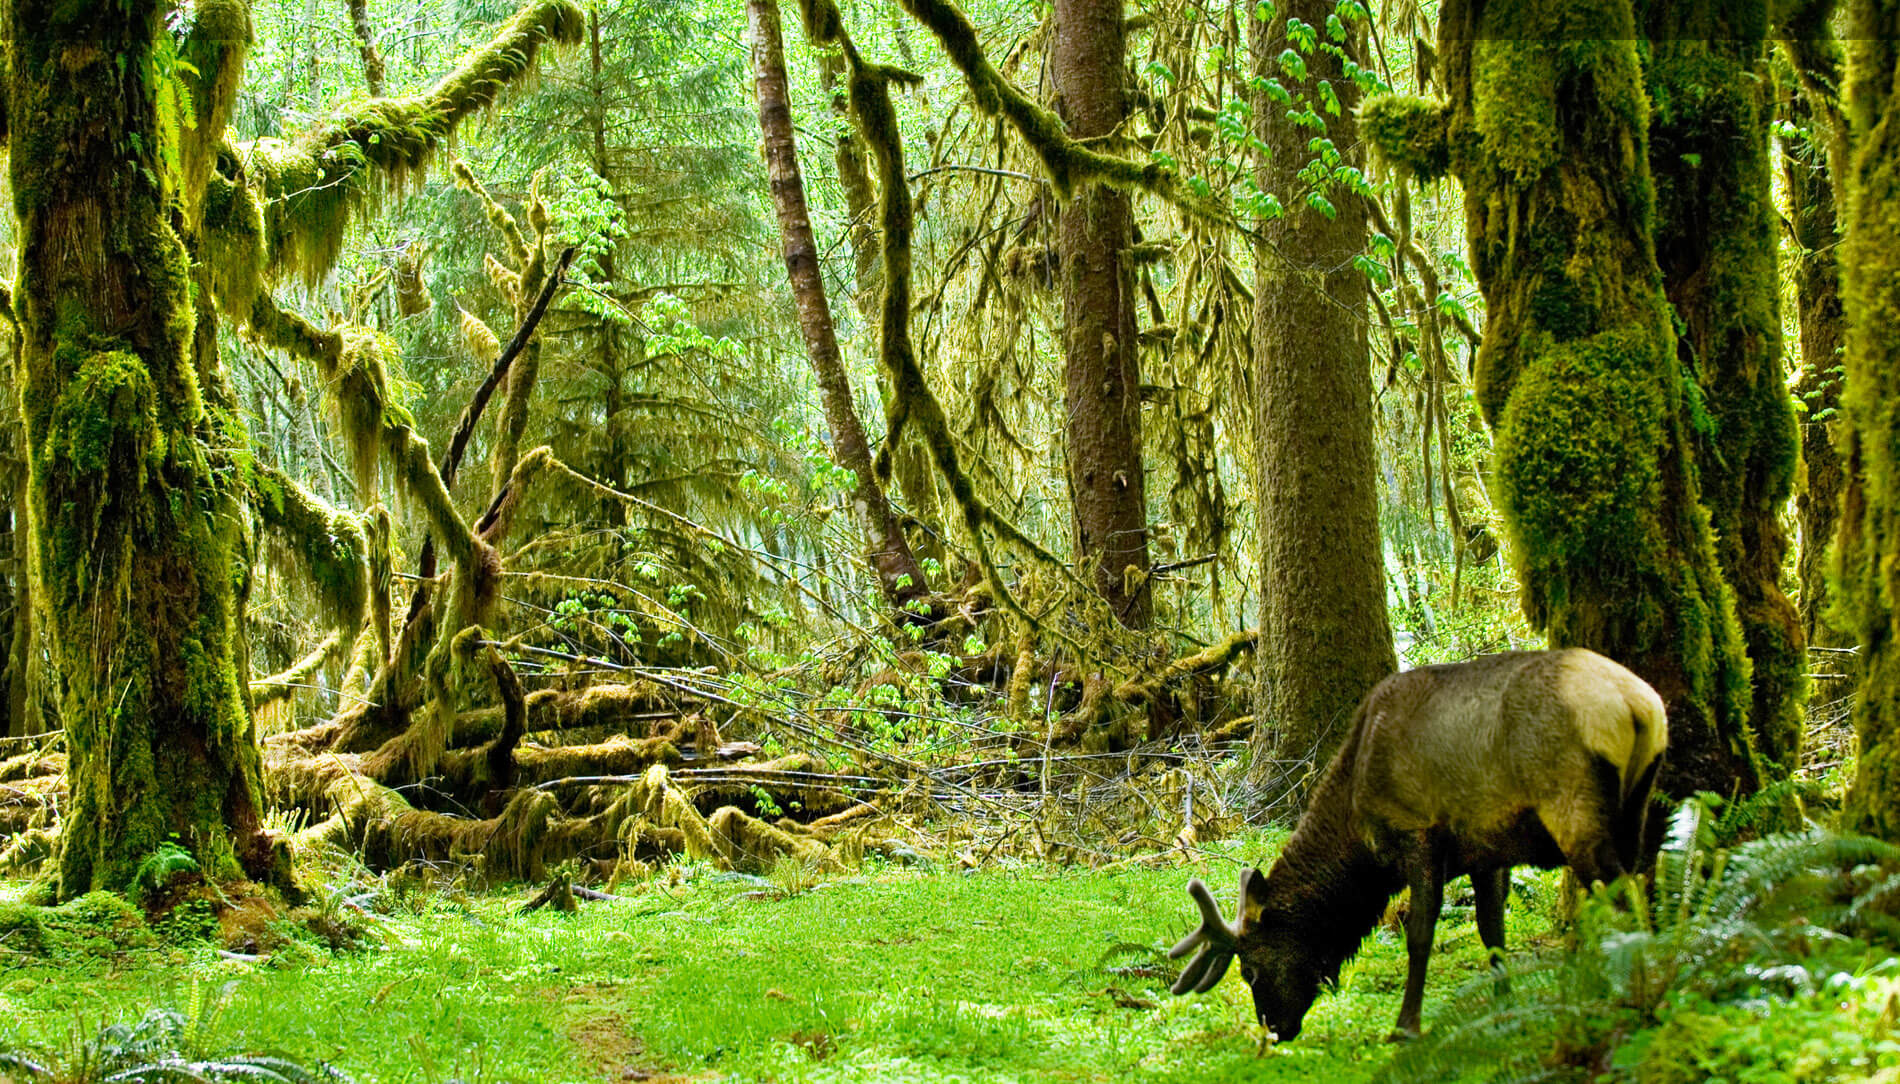 Elk at the Hoh Forest in the Olympic National Park